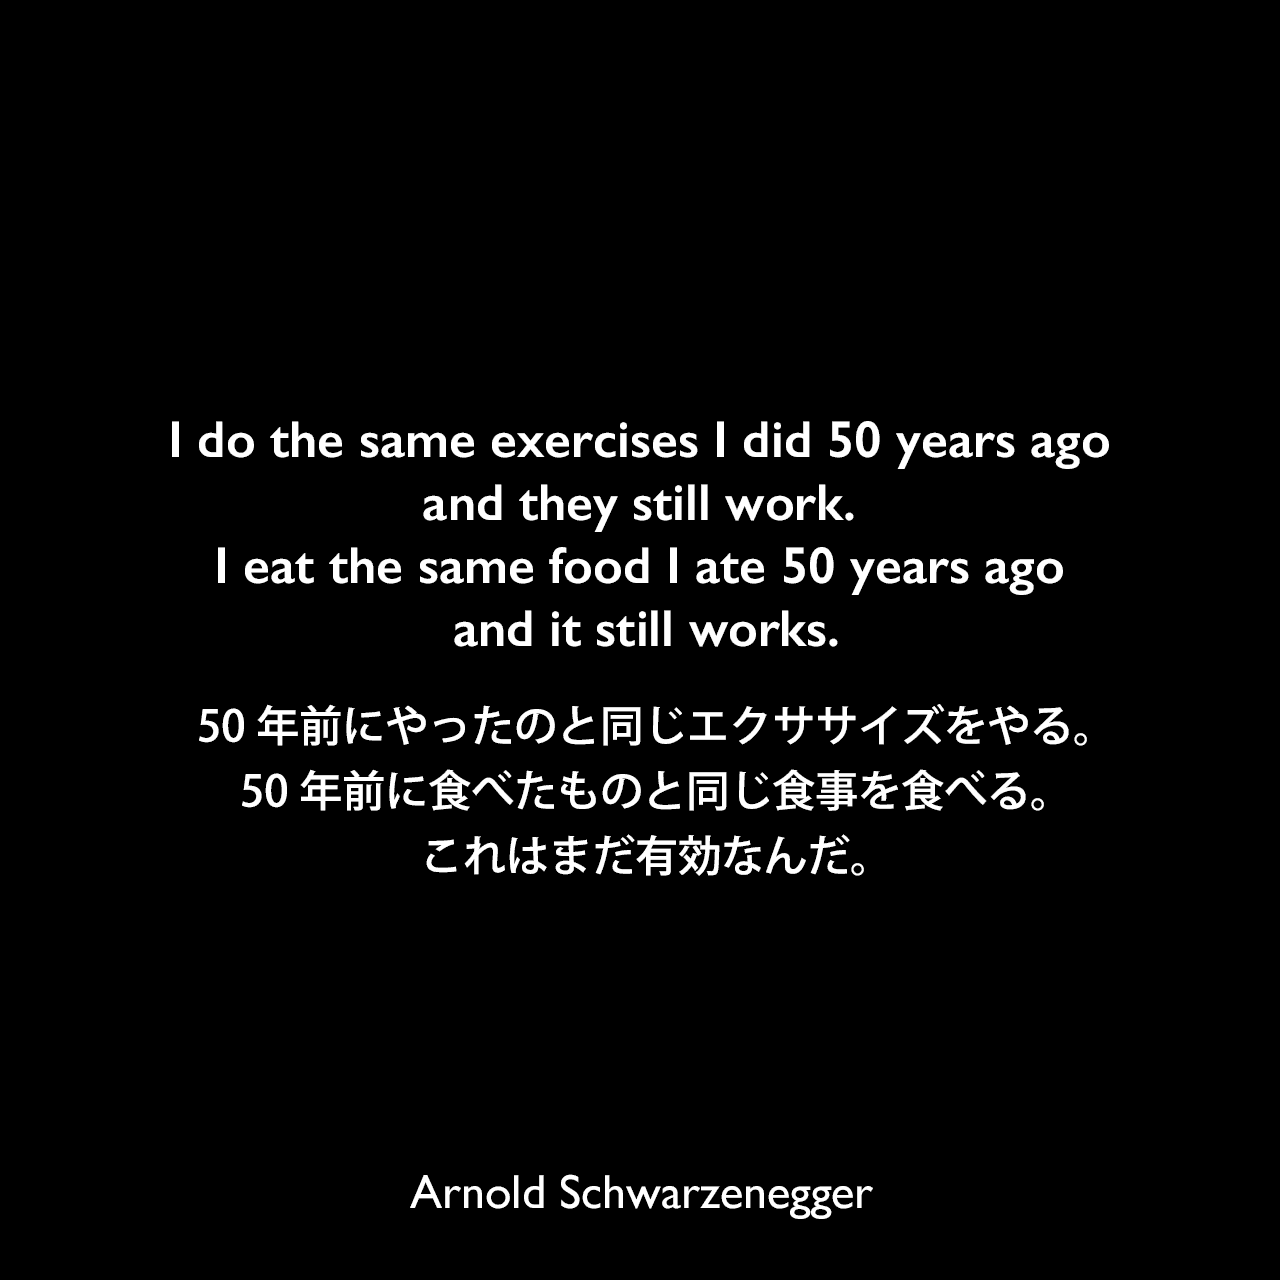 I do the same exercises I did 50 years ago and they still work. I eat the same food I ate 50 years ago and it still works.50年前にやったのと同じエクササイズをやる。50年前に食べたものと同じ食事を食べる。これはまだ有効なんだ。Arnold Schwarzenegger